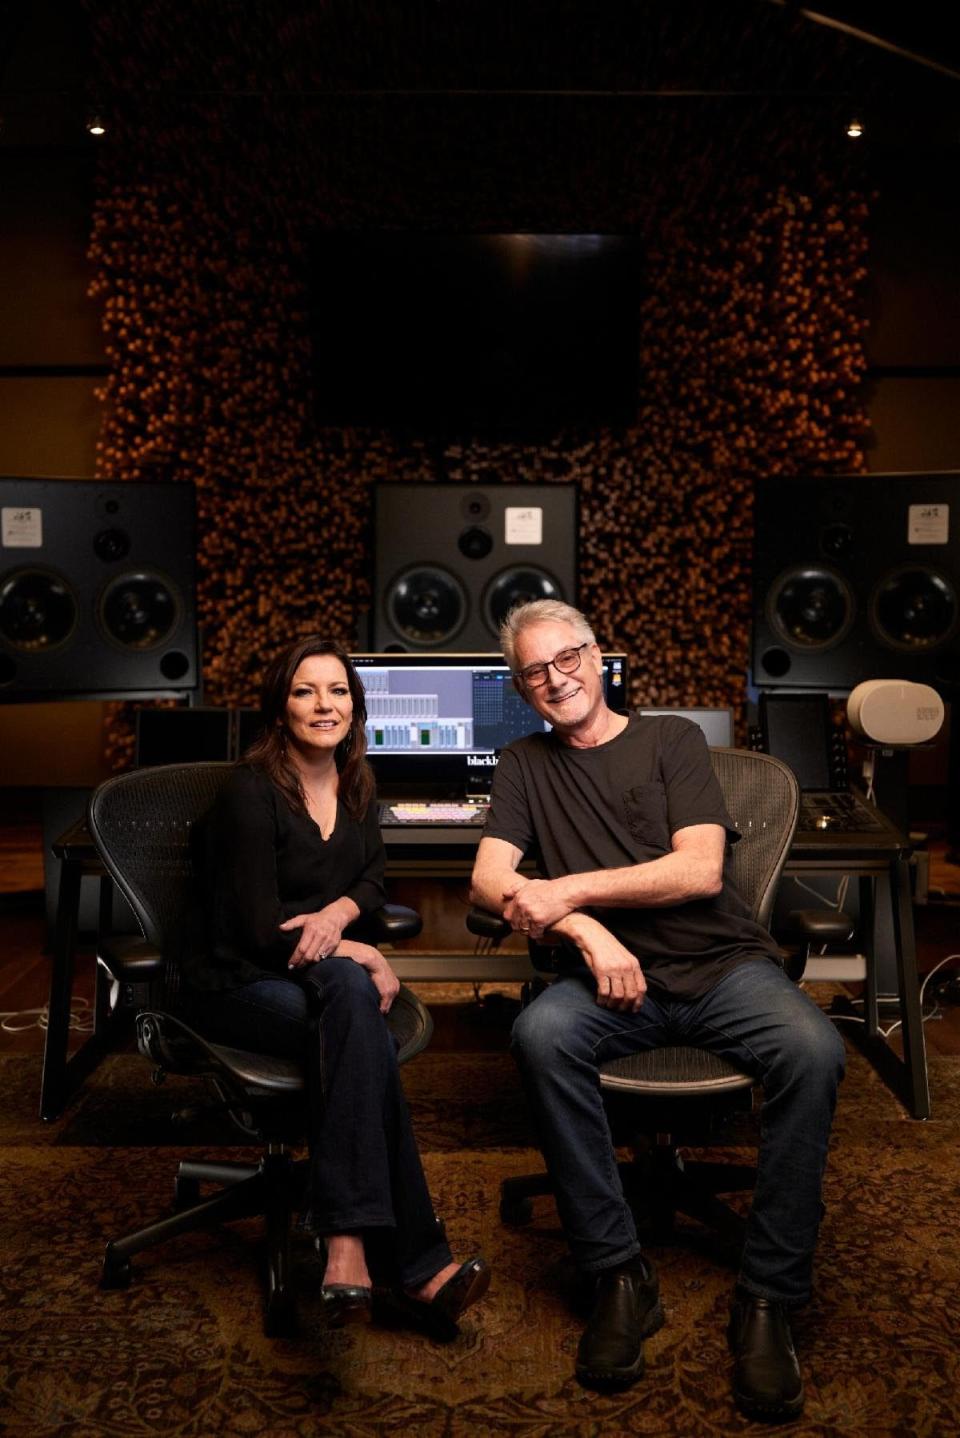 Martina McBride and husband John, a sound engineer and educator, at Nashville's Blackbird Studio, which the couple co-founded in 2002. The studio is a favorite of artists, musicians, producers and engineers worldwide, and has worked with a multitude of performers from A (Adele) to Z (Zac Brown Band).